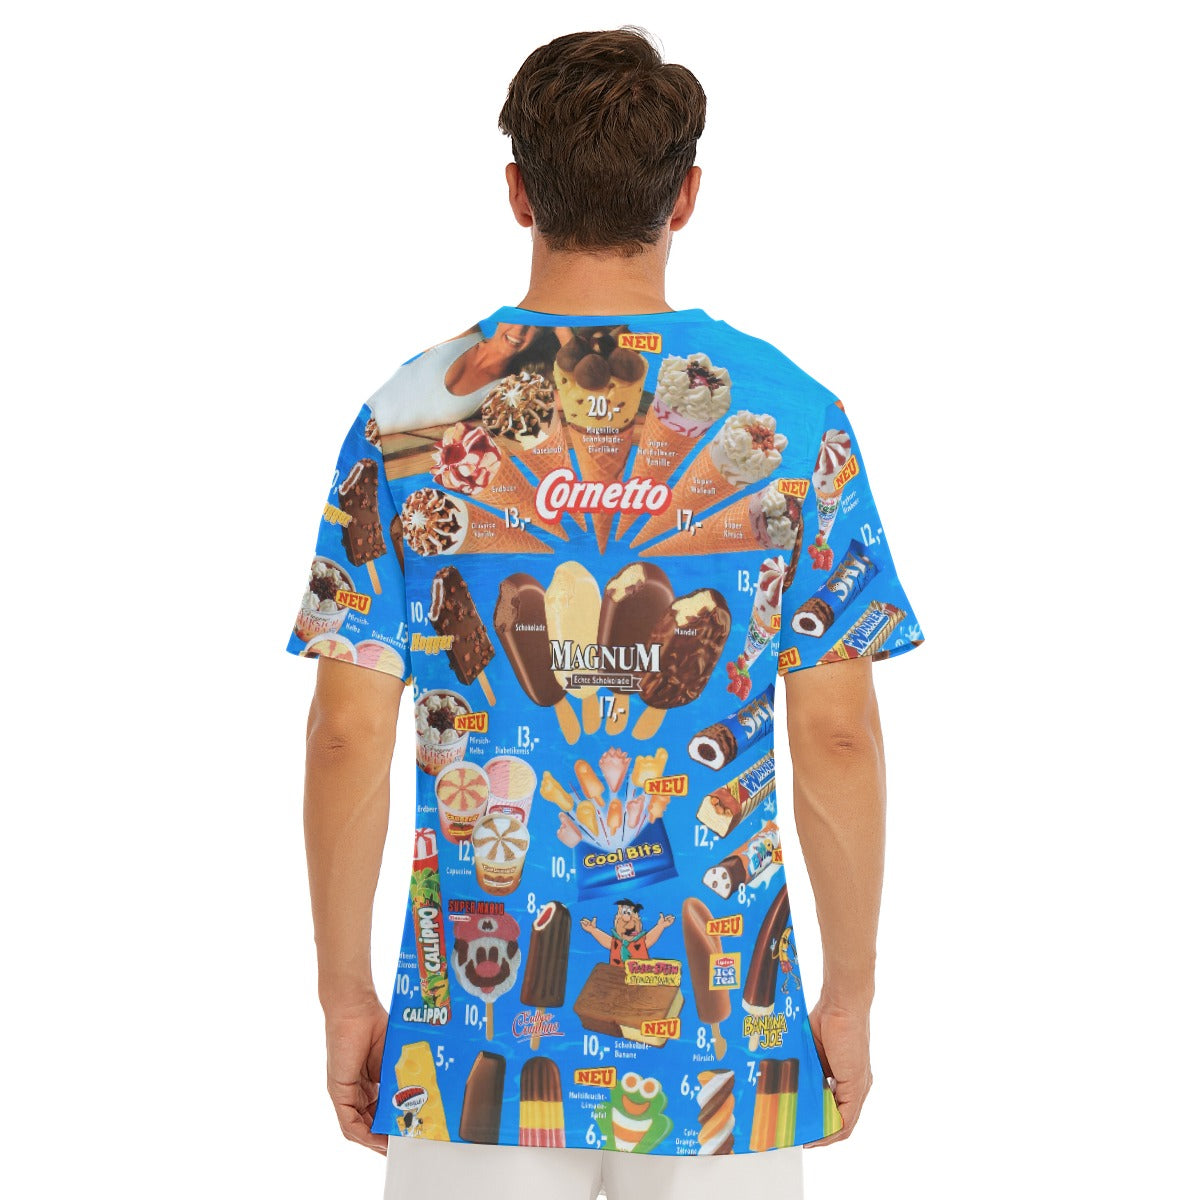 Tropical Hawaiian graphic tee perfect for beach outings.